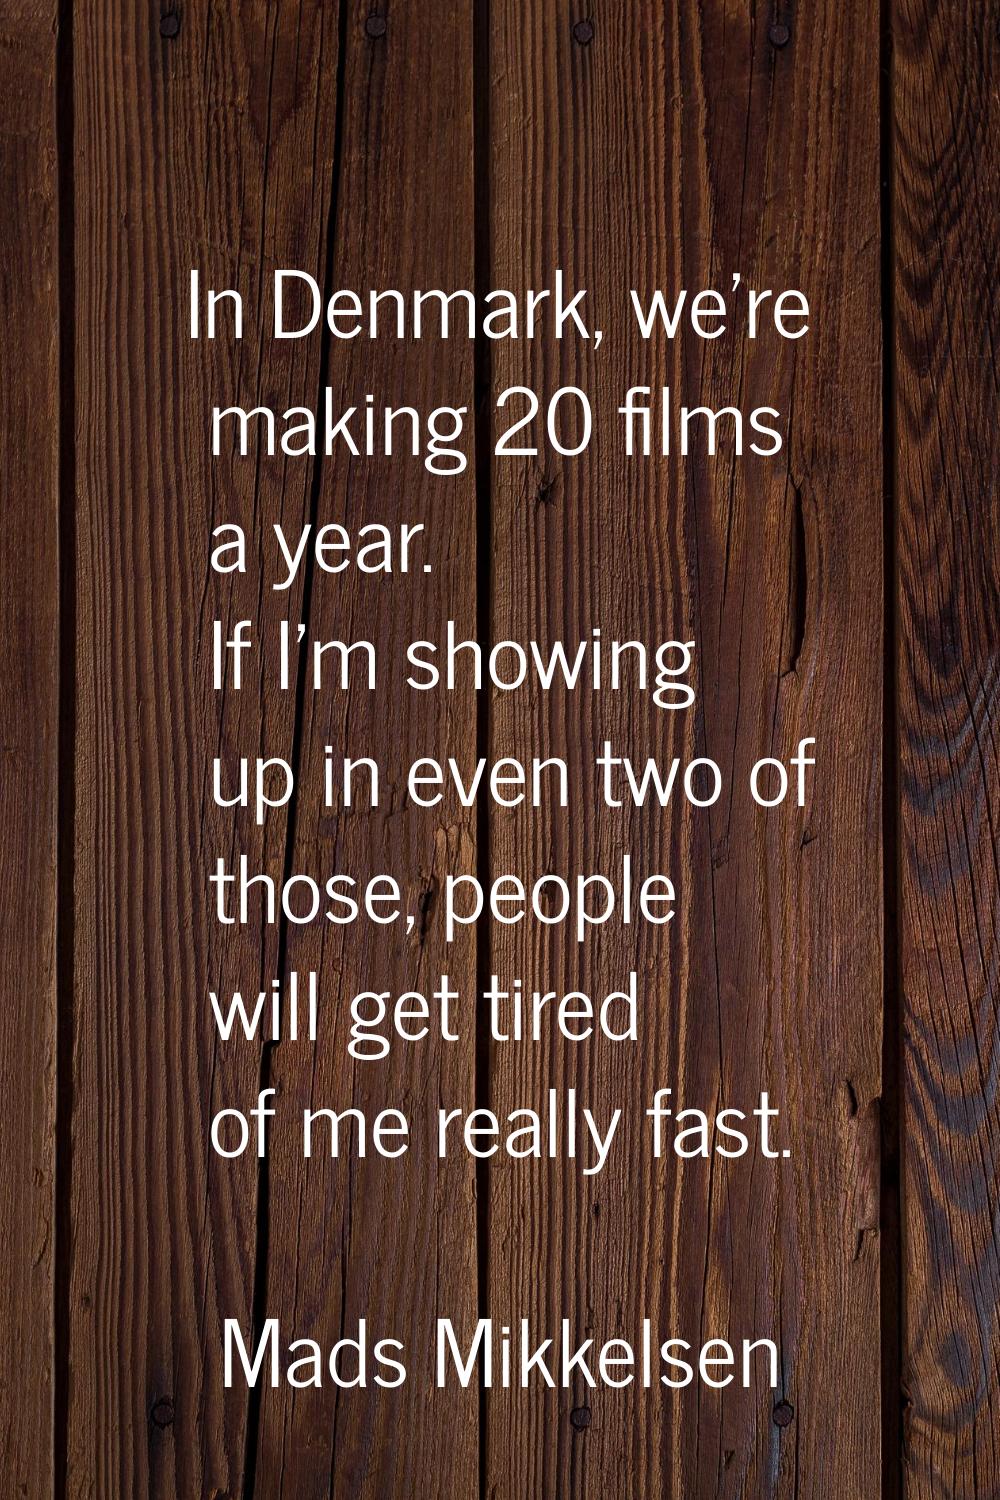 In Denmark, we're making 20 films a year. If I'm showing up in even two of those, people will get t